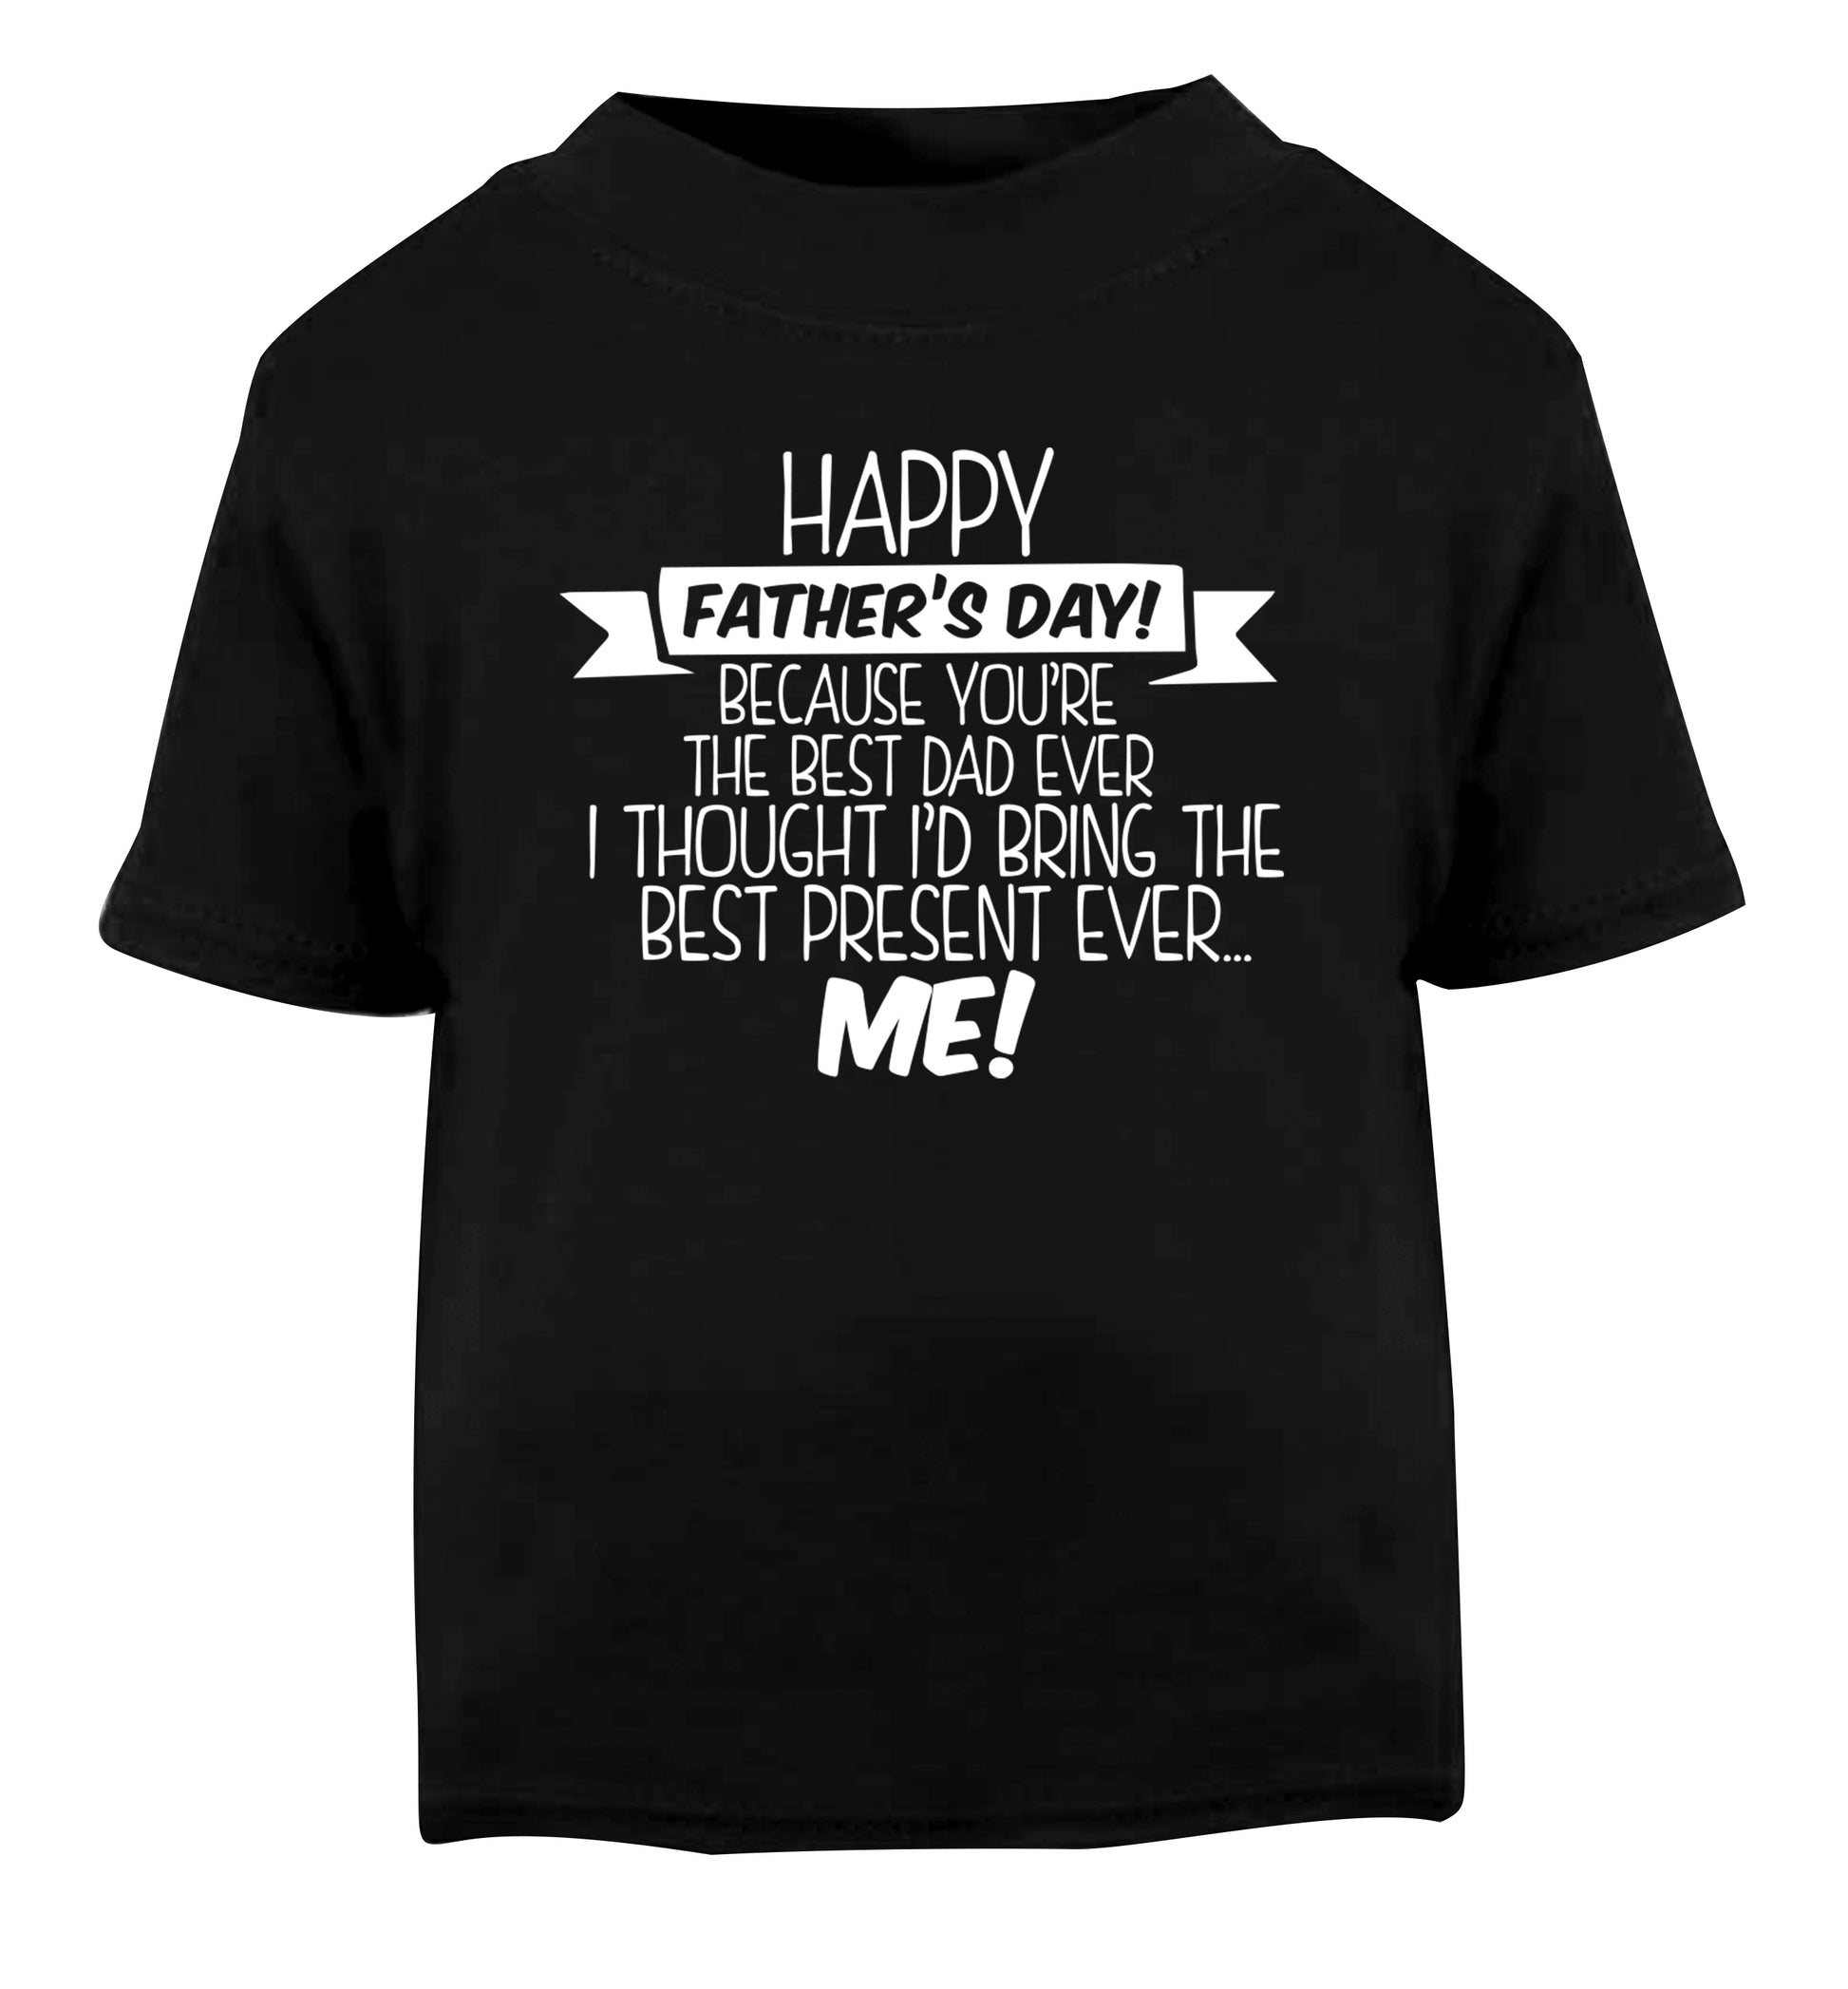 Happy Father's day, because you're the best dad ever I thought I'd bring the best present ever...me! Black Baby Toddler Tshirt 2 years